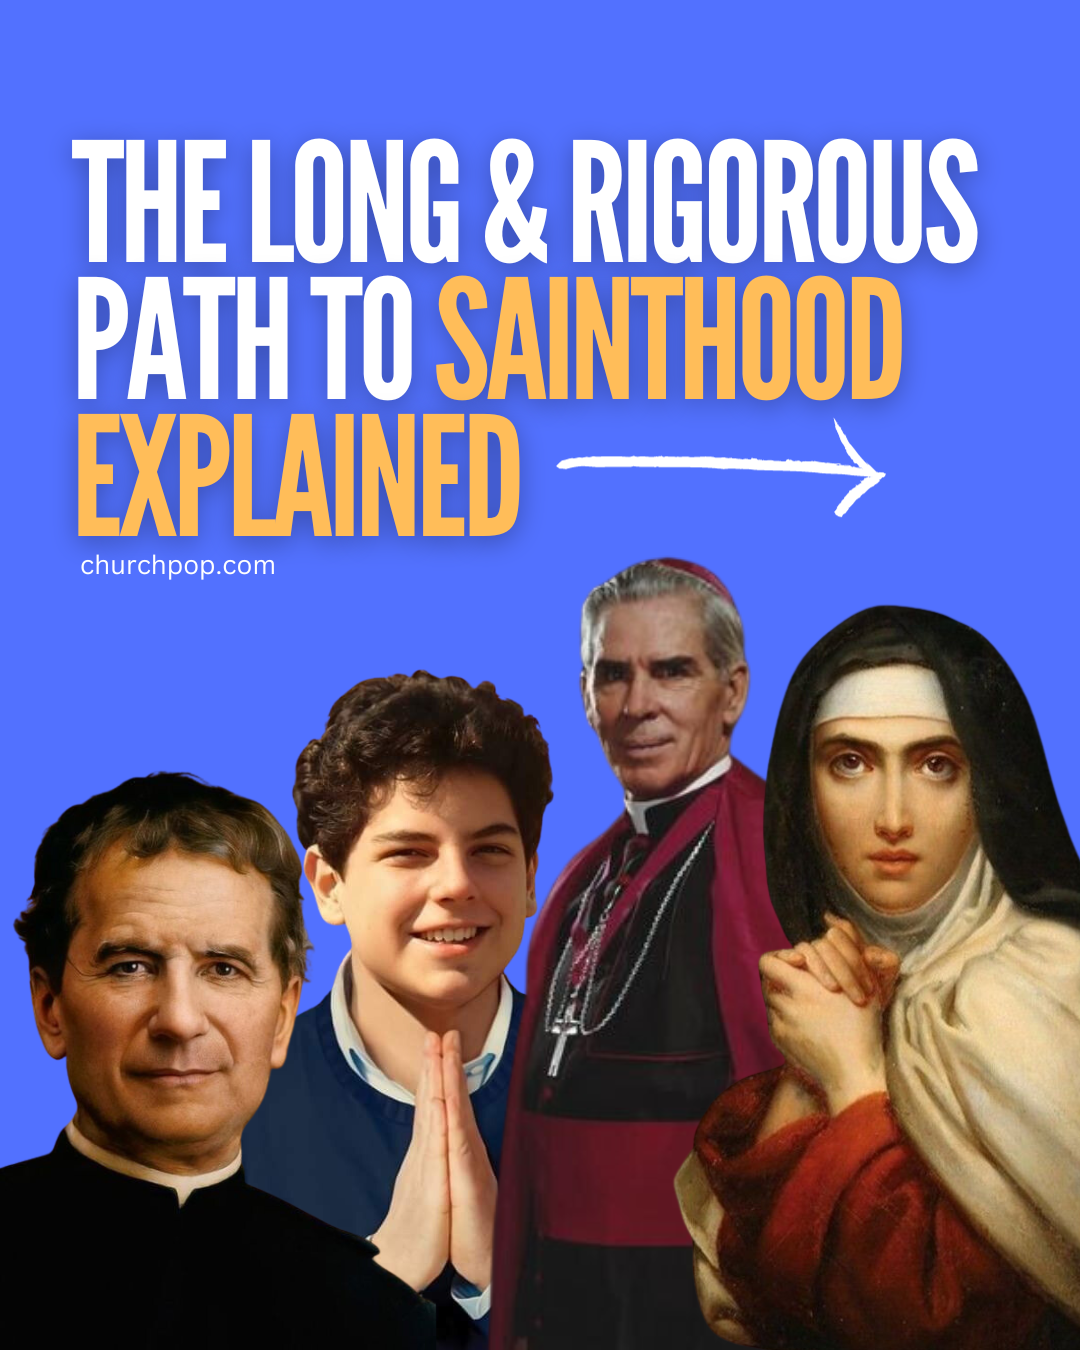 canonization definition, canonize meaning, how to become a saint, canonization process